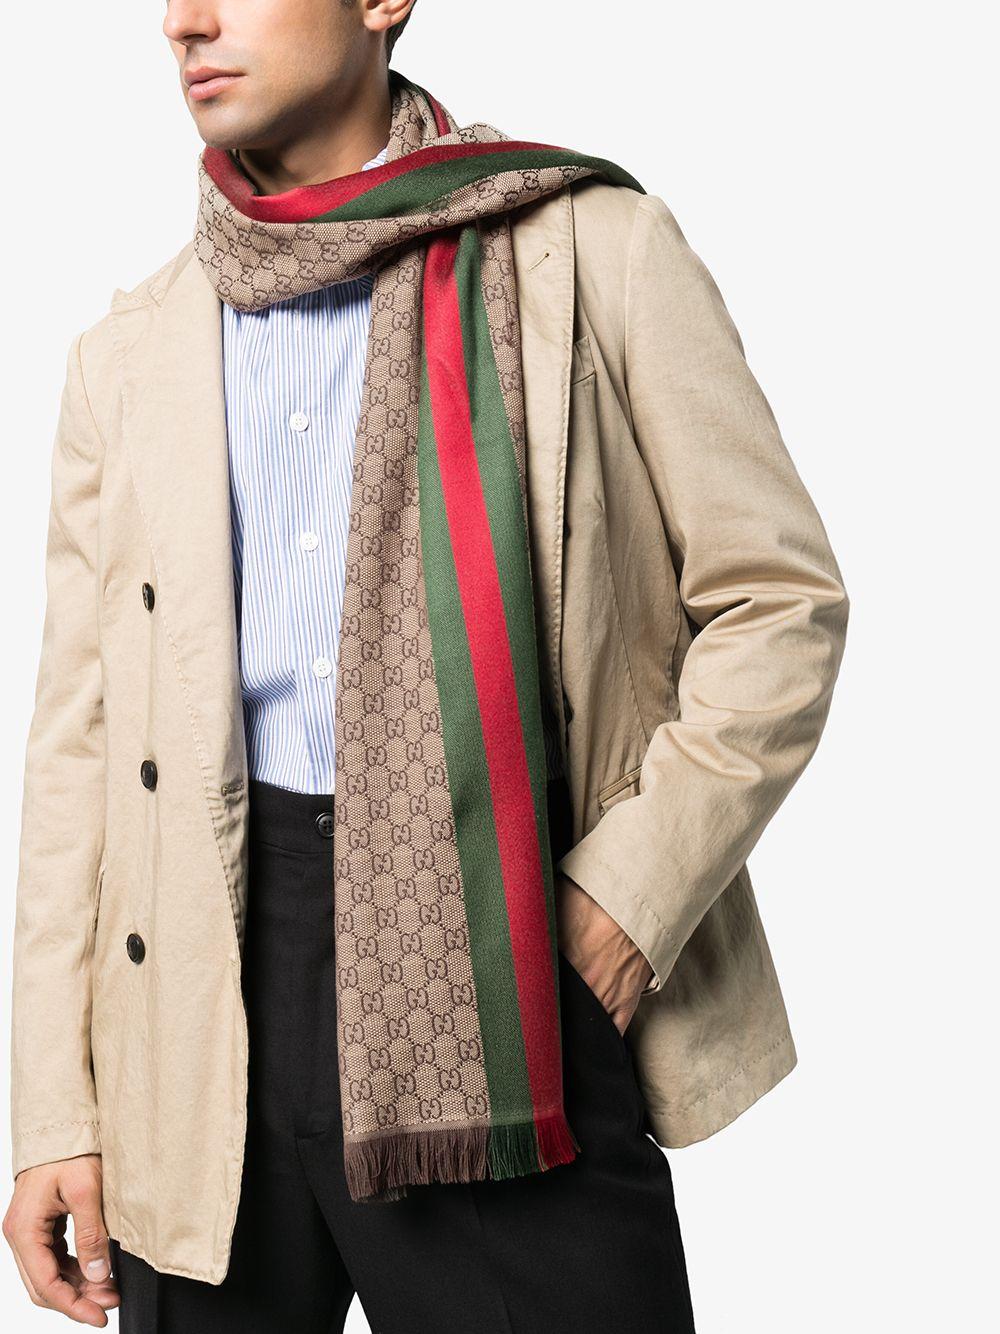 Gucci Web Snake Scarf for Men's 2016 Collection 